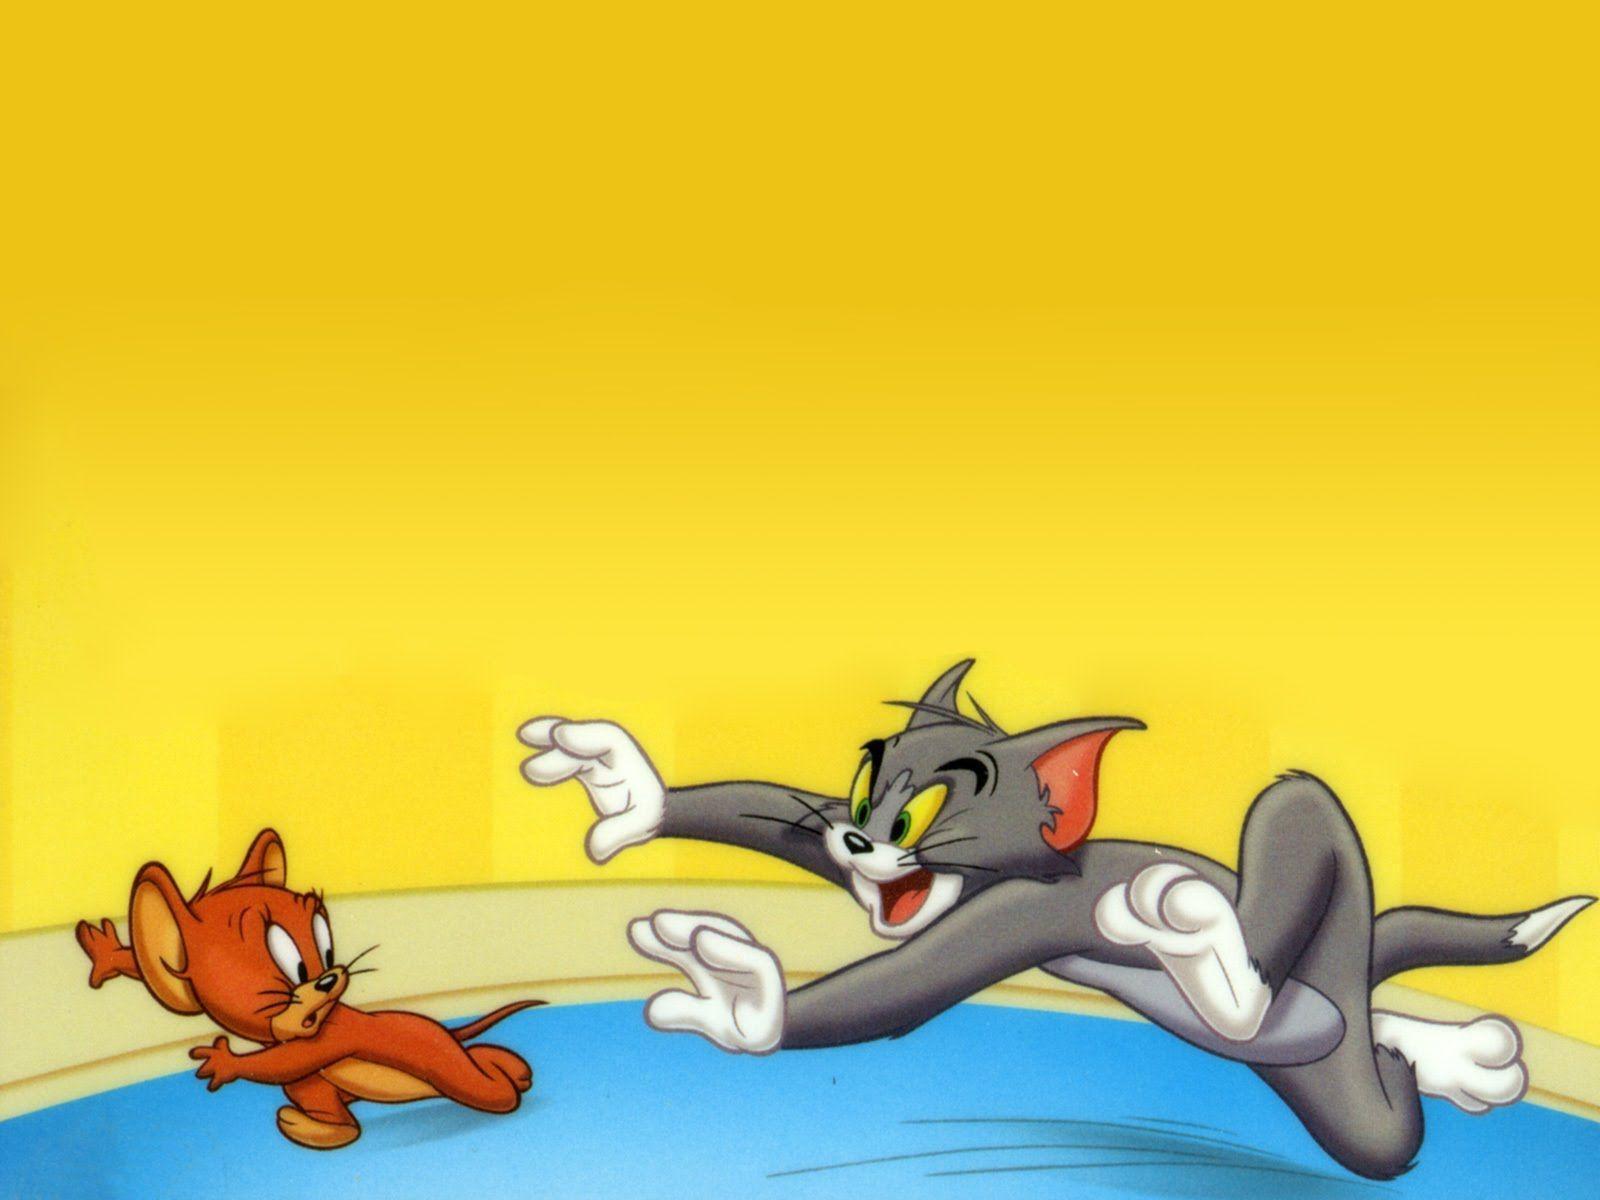 Tom and Jerry Wallpapers 2014